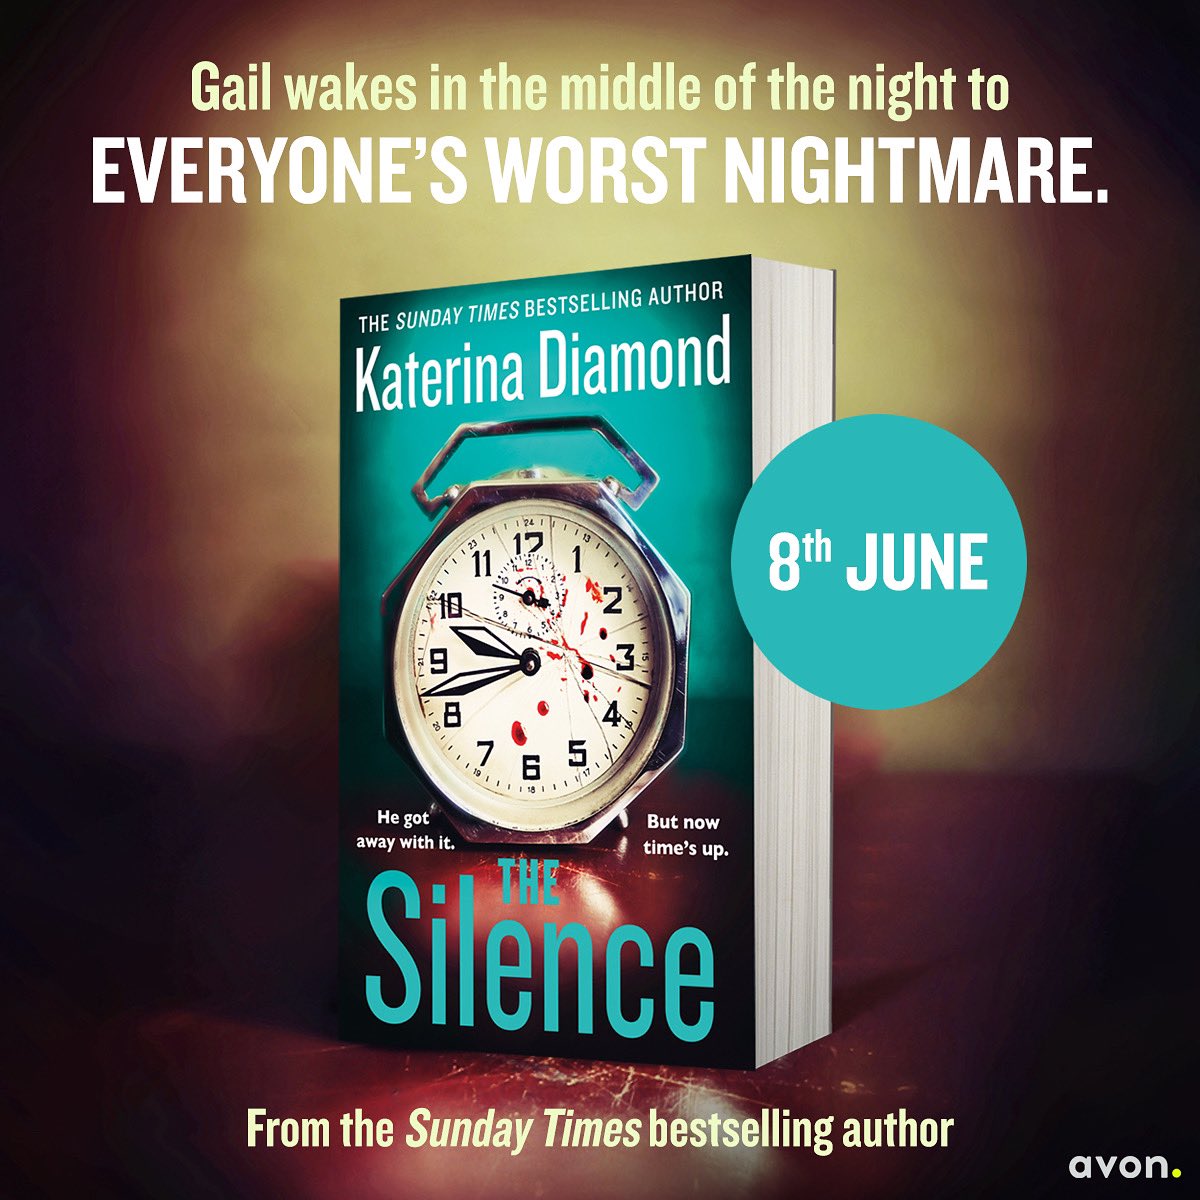 It’s Cover Reveal day for the new psychological thriller #TheSilence by Katerina Diamond, out on 8th June from @AvonBooksUK. Looking forward to another great read from @TheVenomousPen